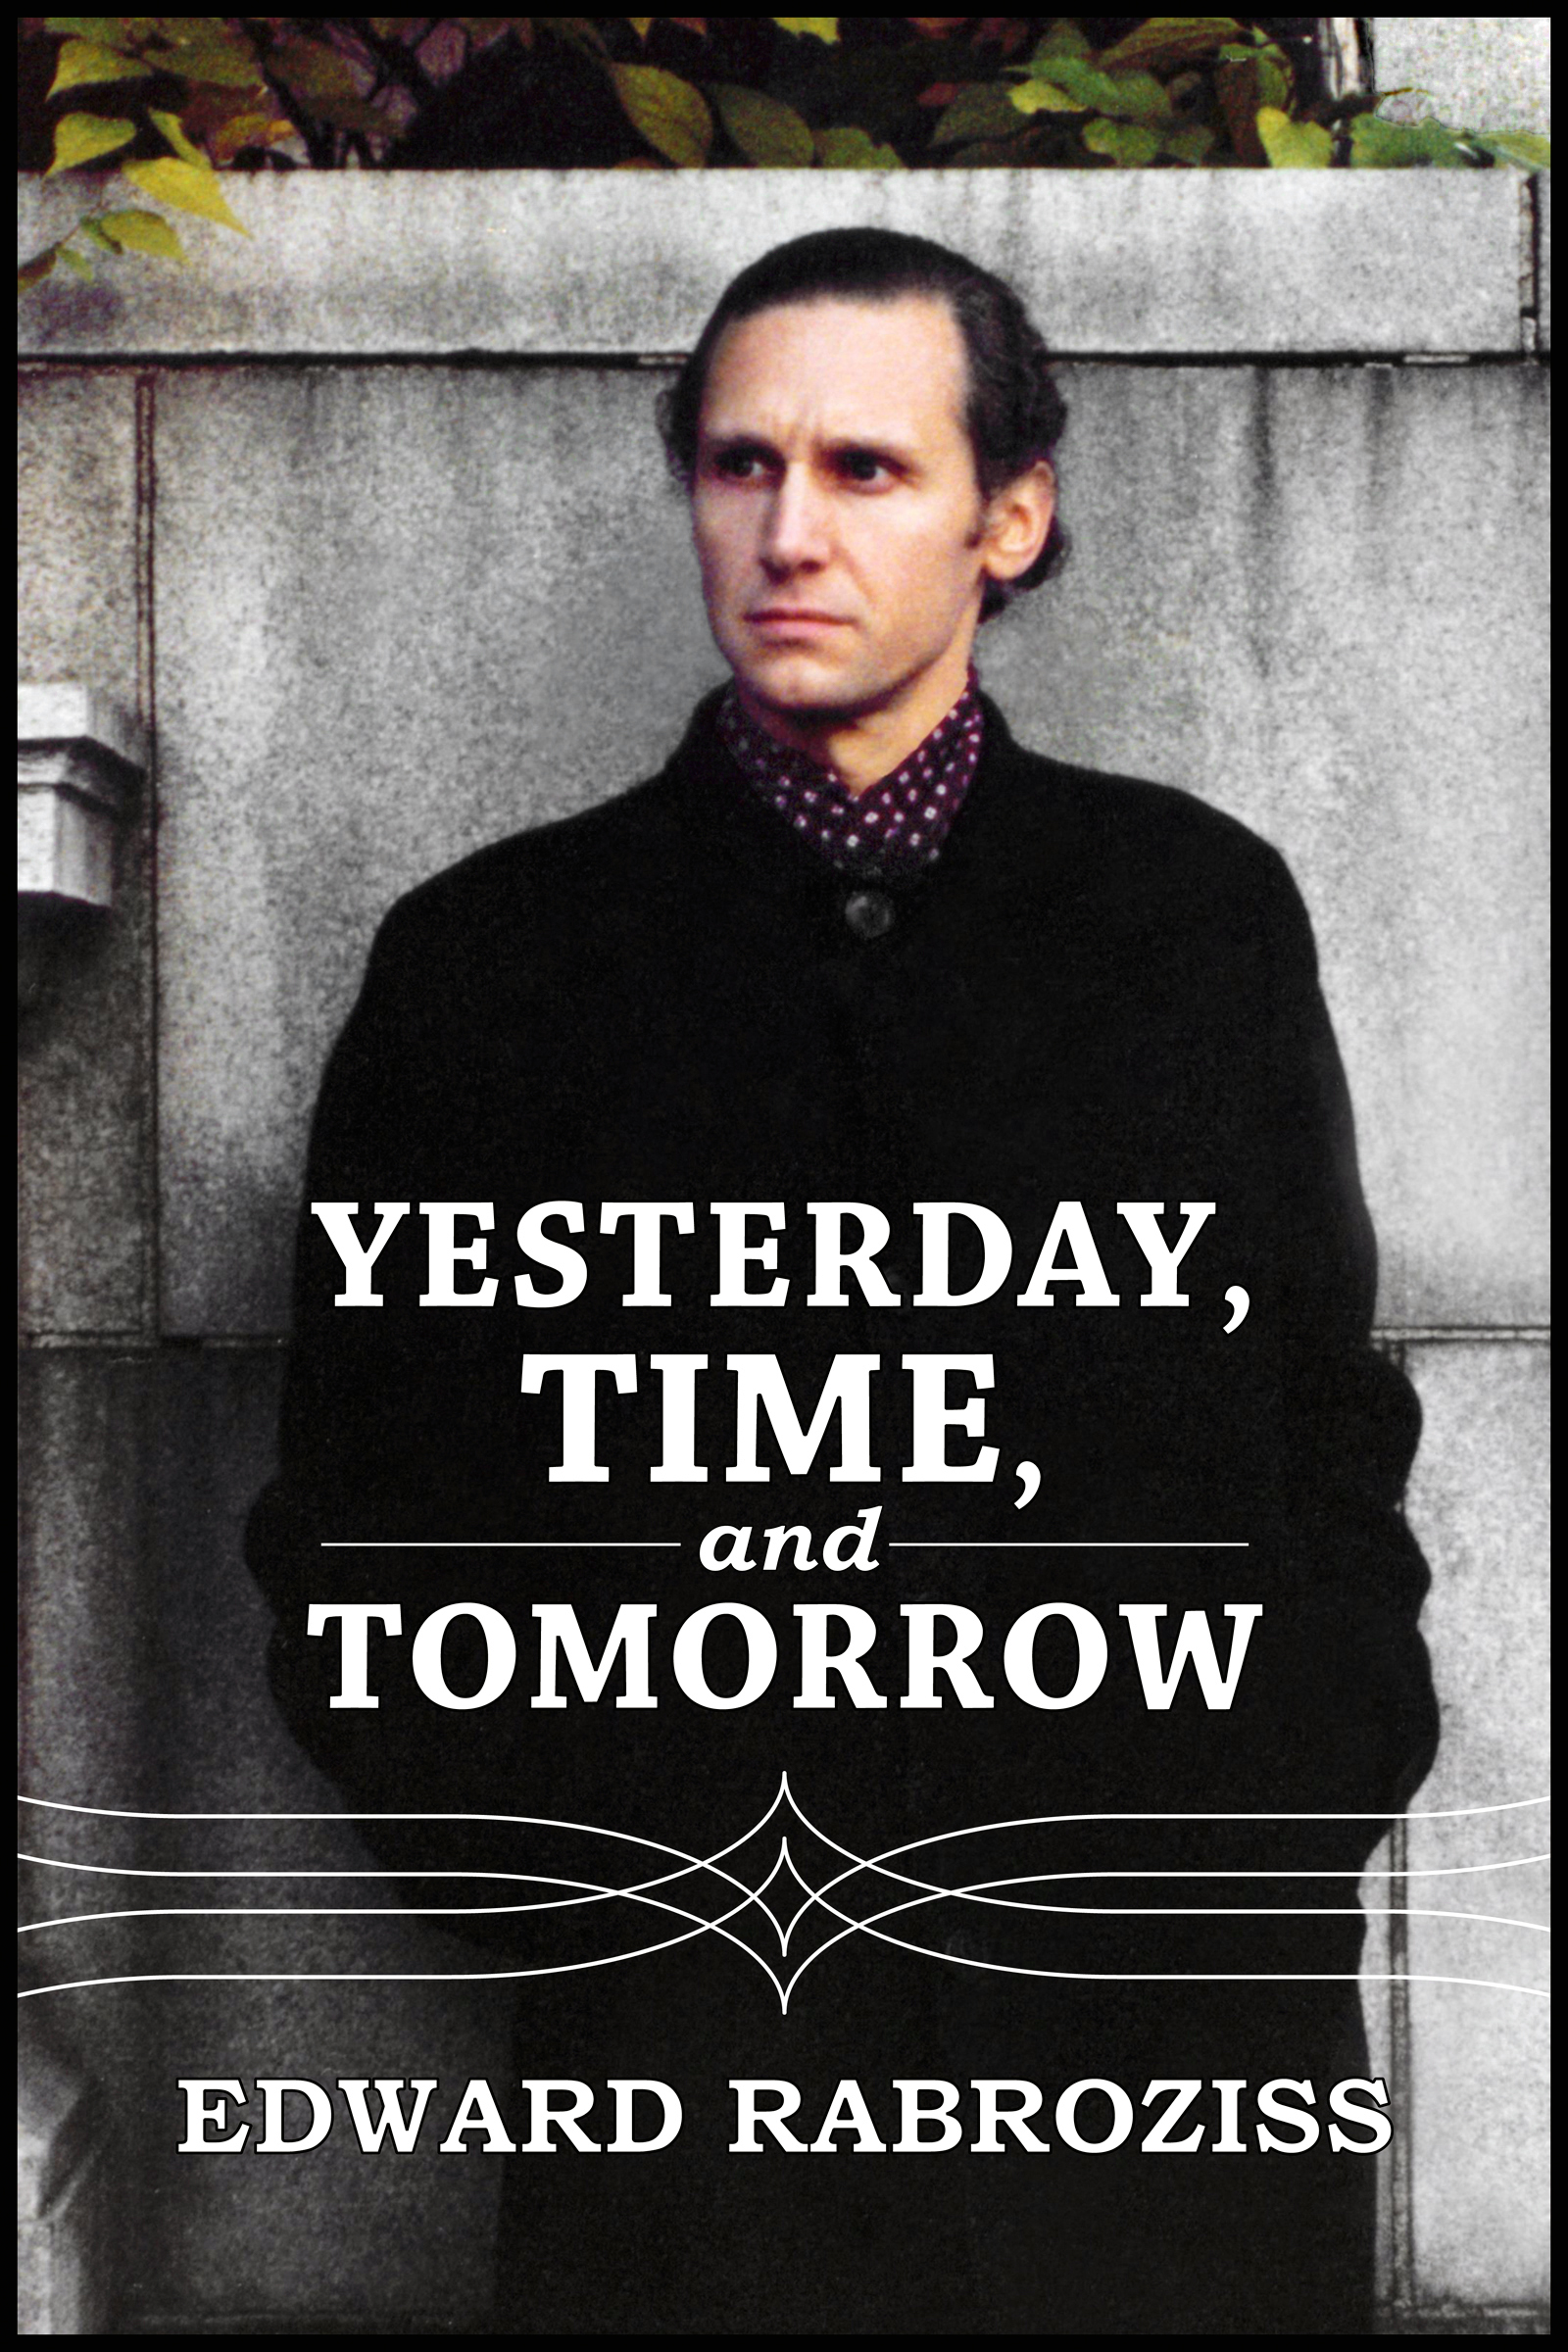 FREE: Yesterday, TIME, and Tomorrow by Edward Rabroziss